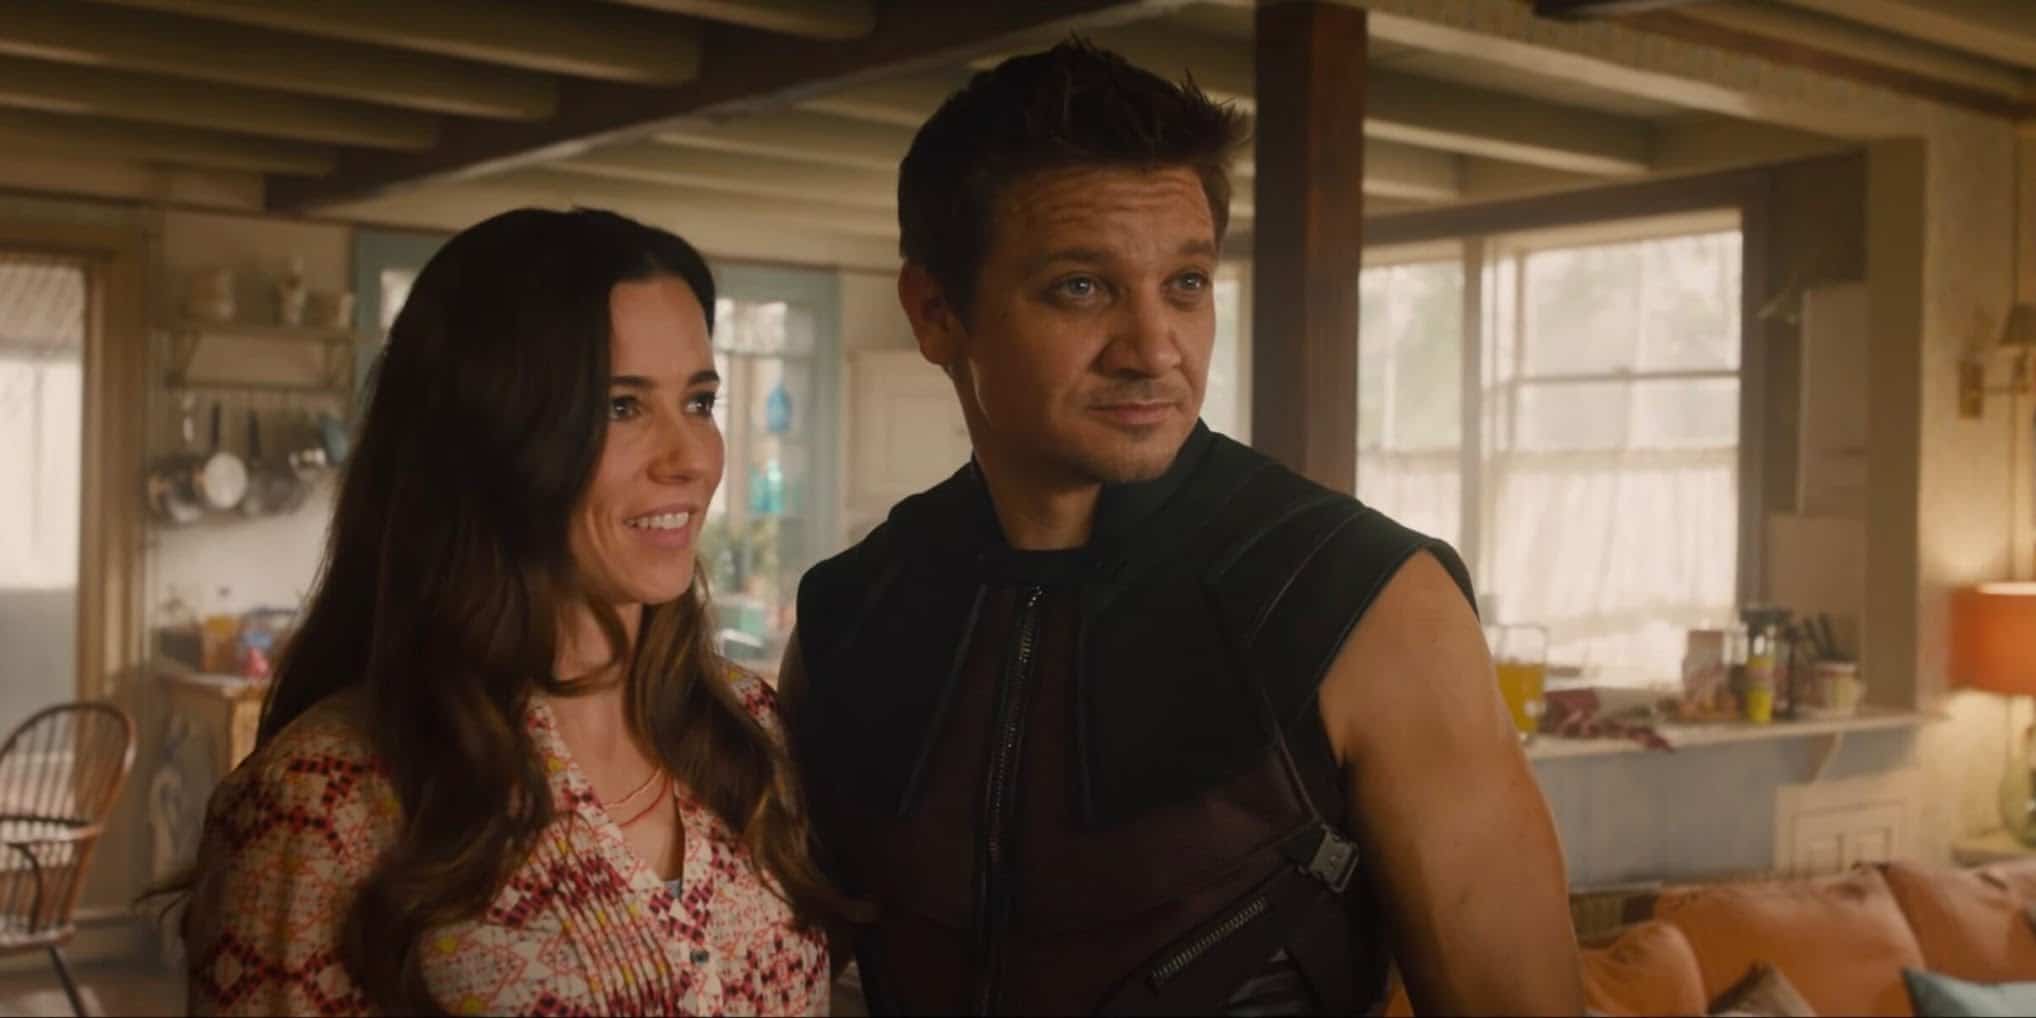 Infinity War writers talk about why having Hawkeye in the movie wouldn't have worked. Pic courtesy: dailydot.com